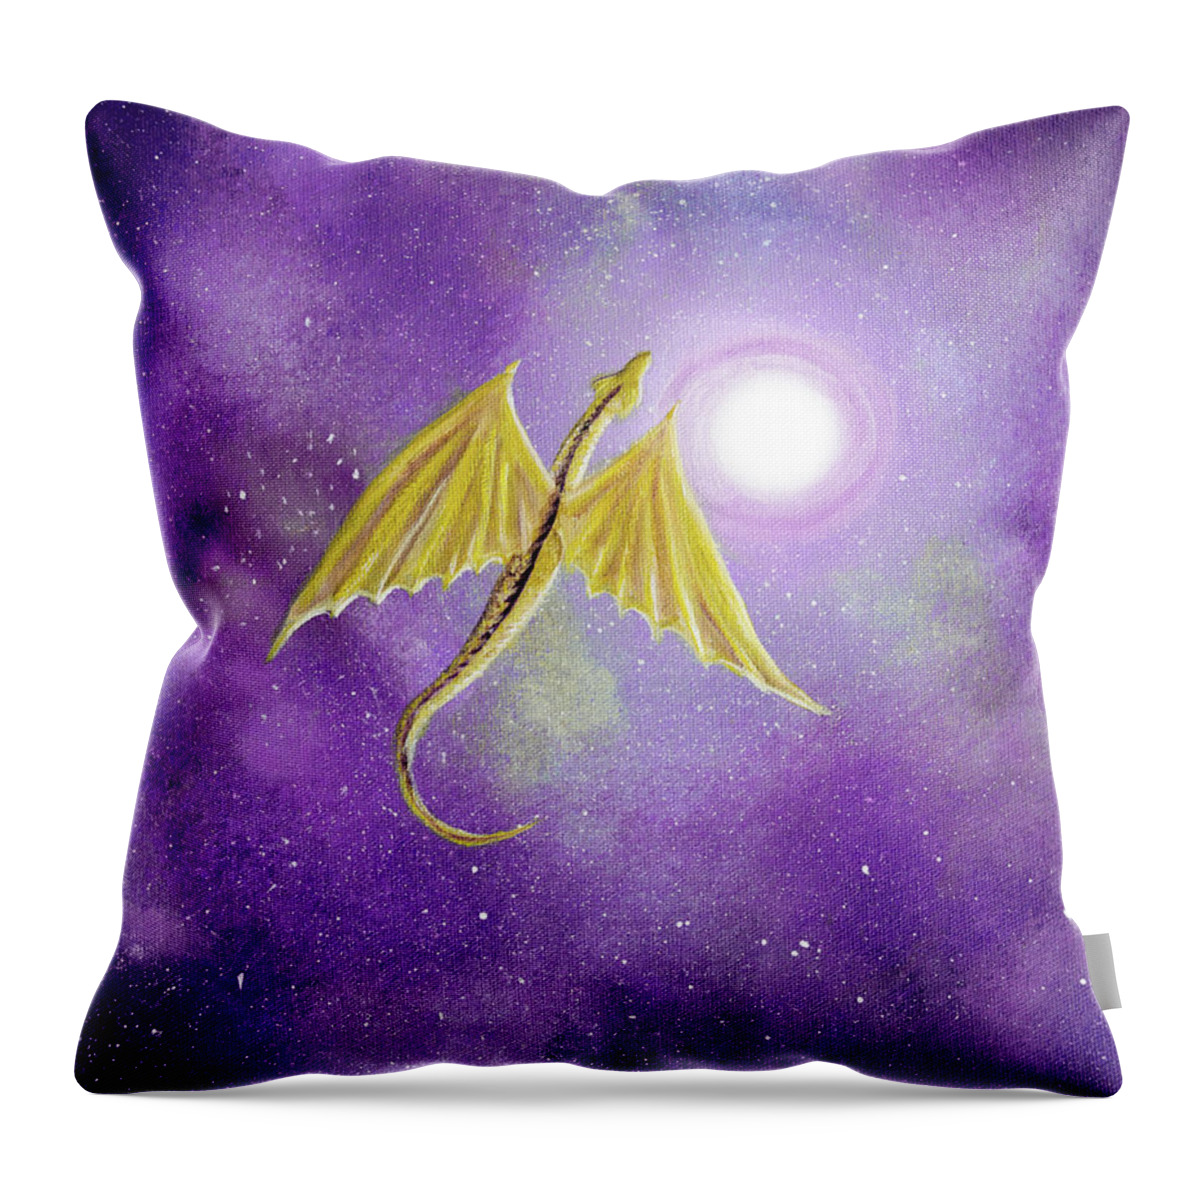 Dragon Throw Pillow featuring the painting Golden Dragon Soaring in Purple Cosmos by Laura Iverson